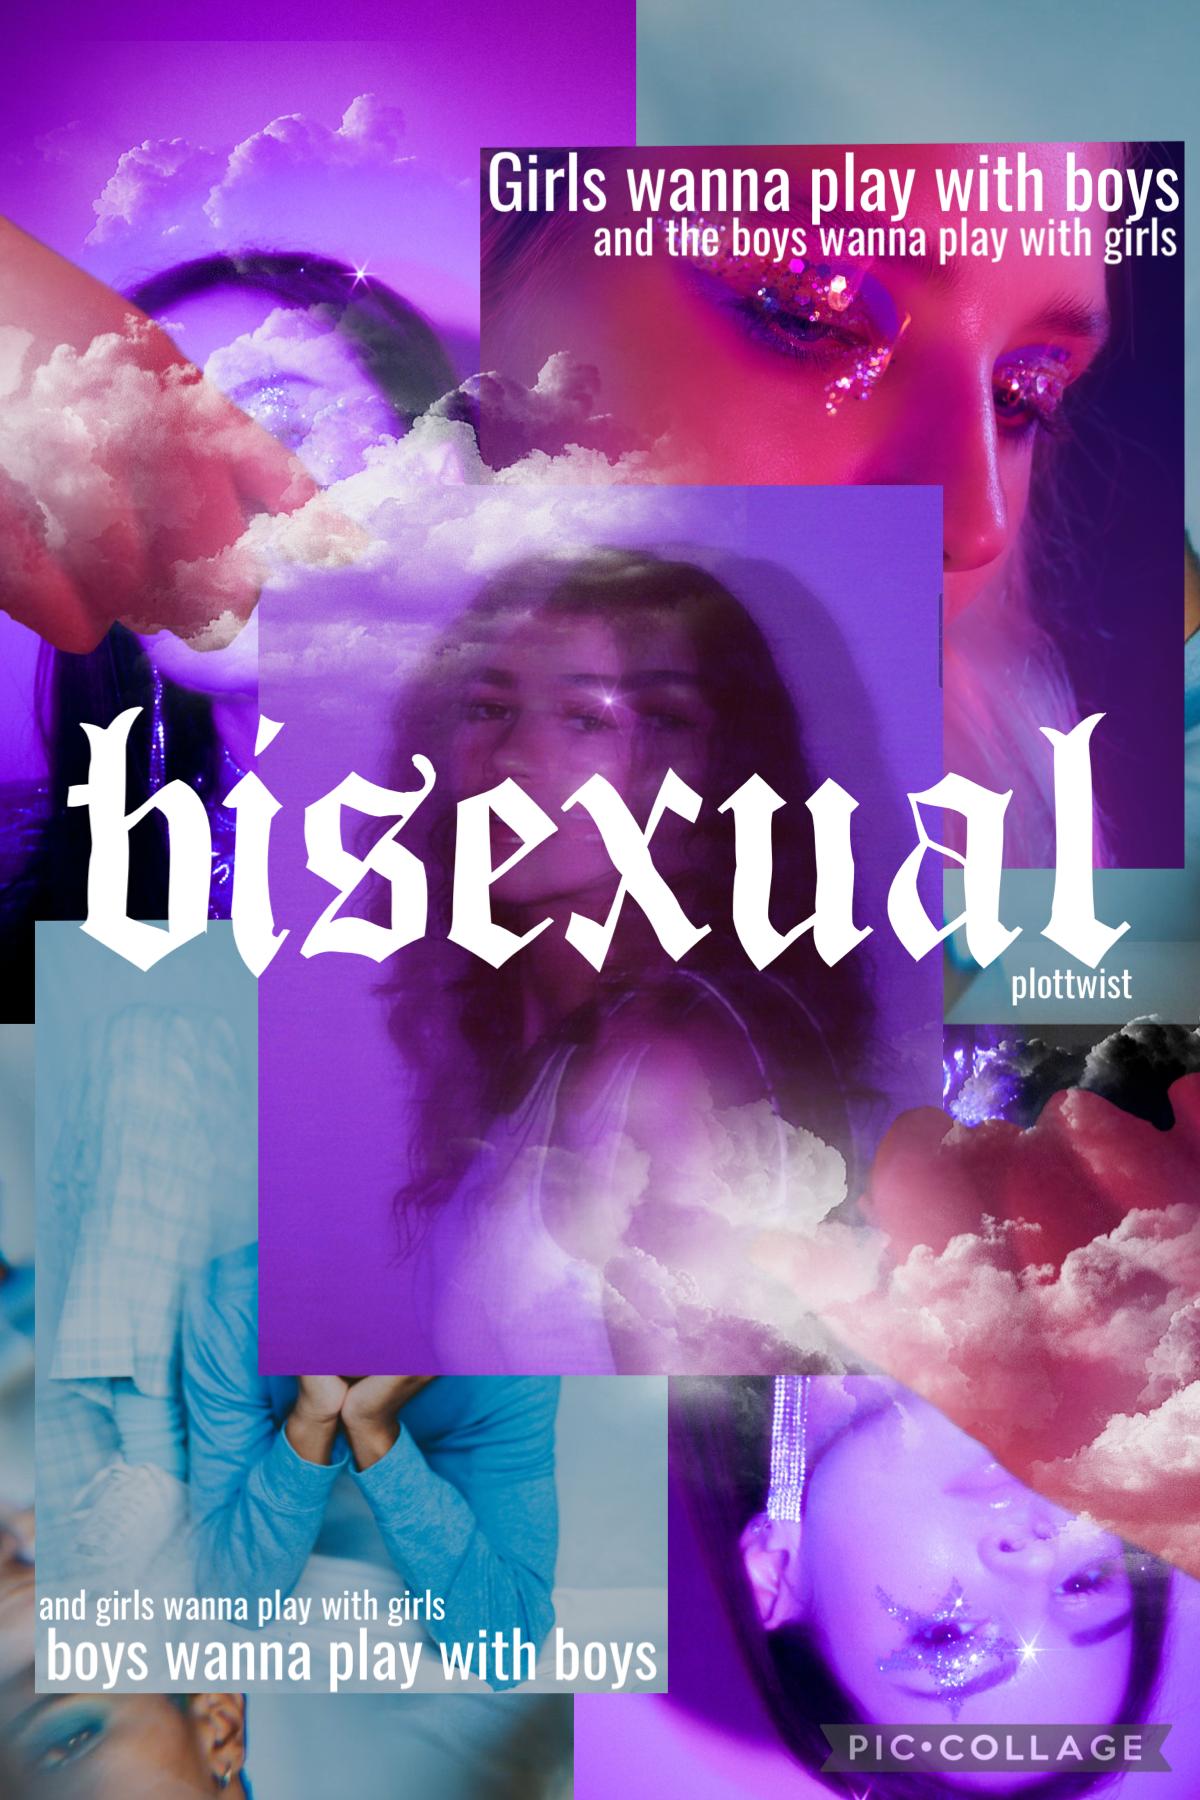 Pride flag collage #4!
Bisexual! This was requested by lyly, feel free to leave more requests in the comments! Check the remixes for info about bisexuals!